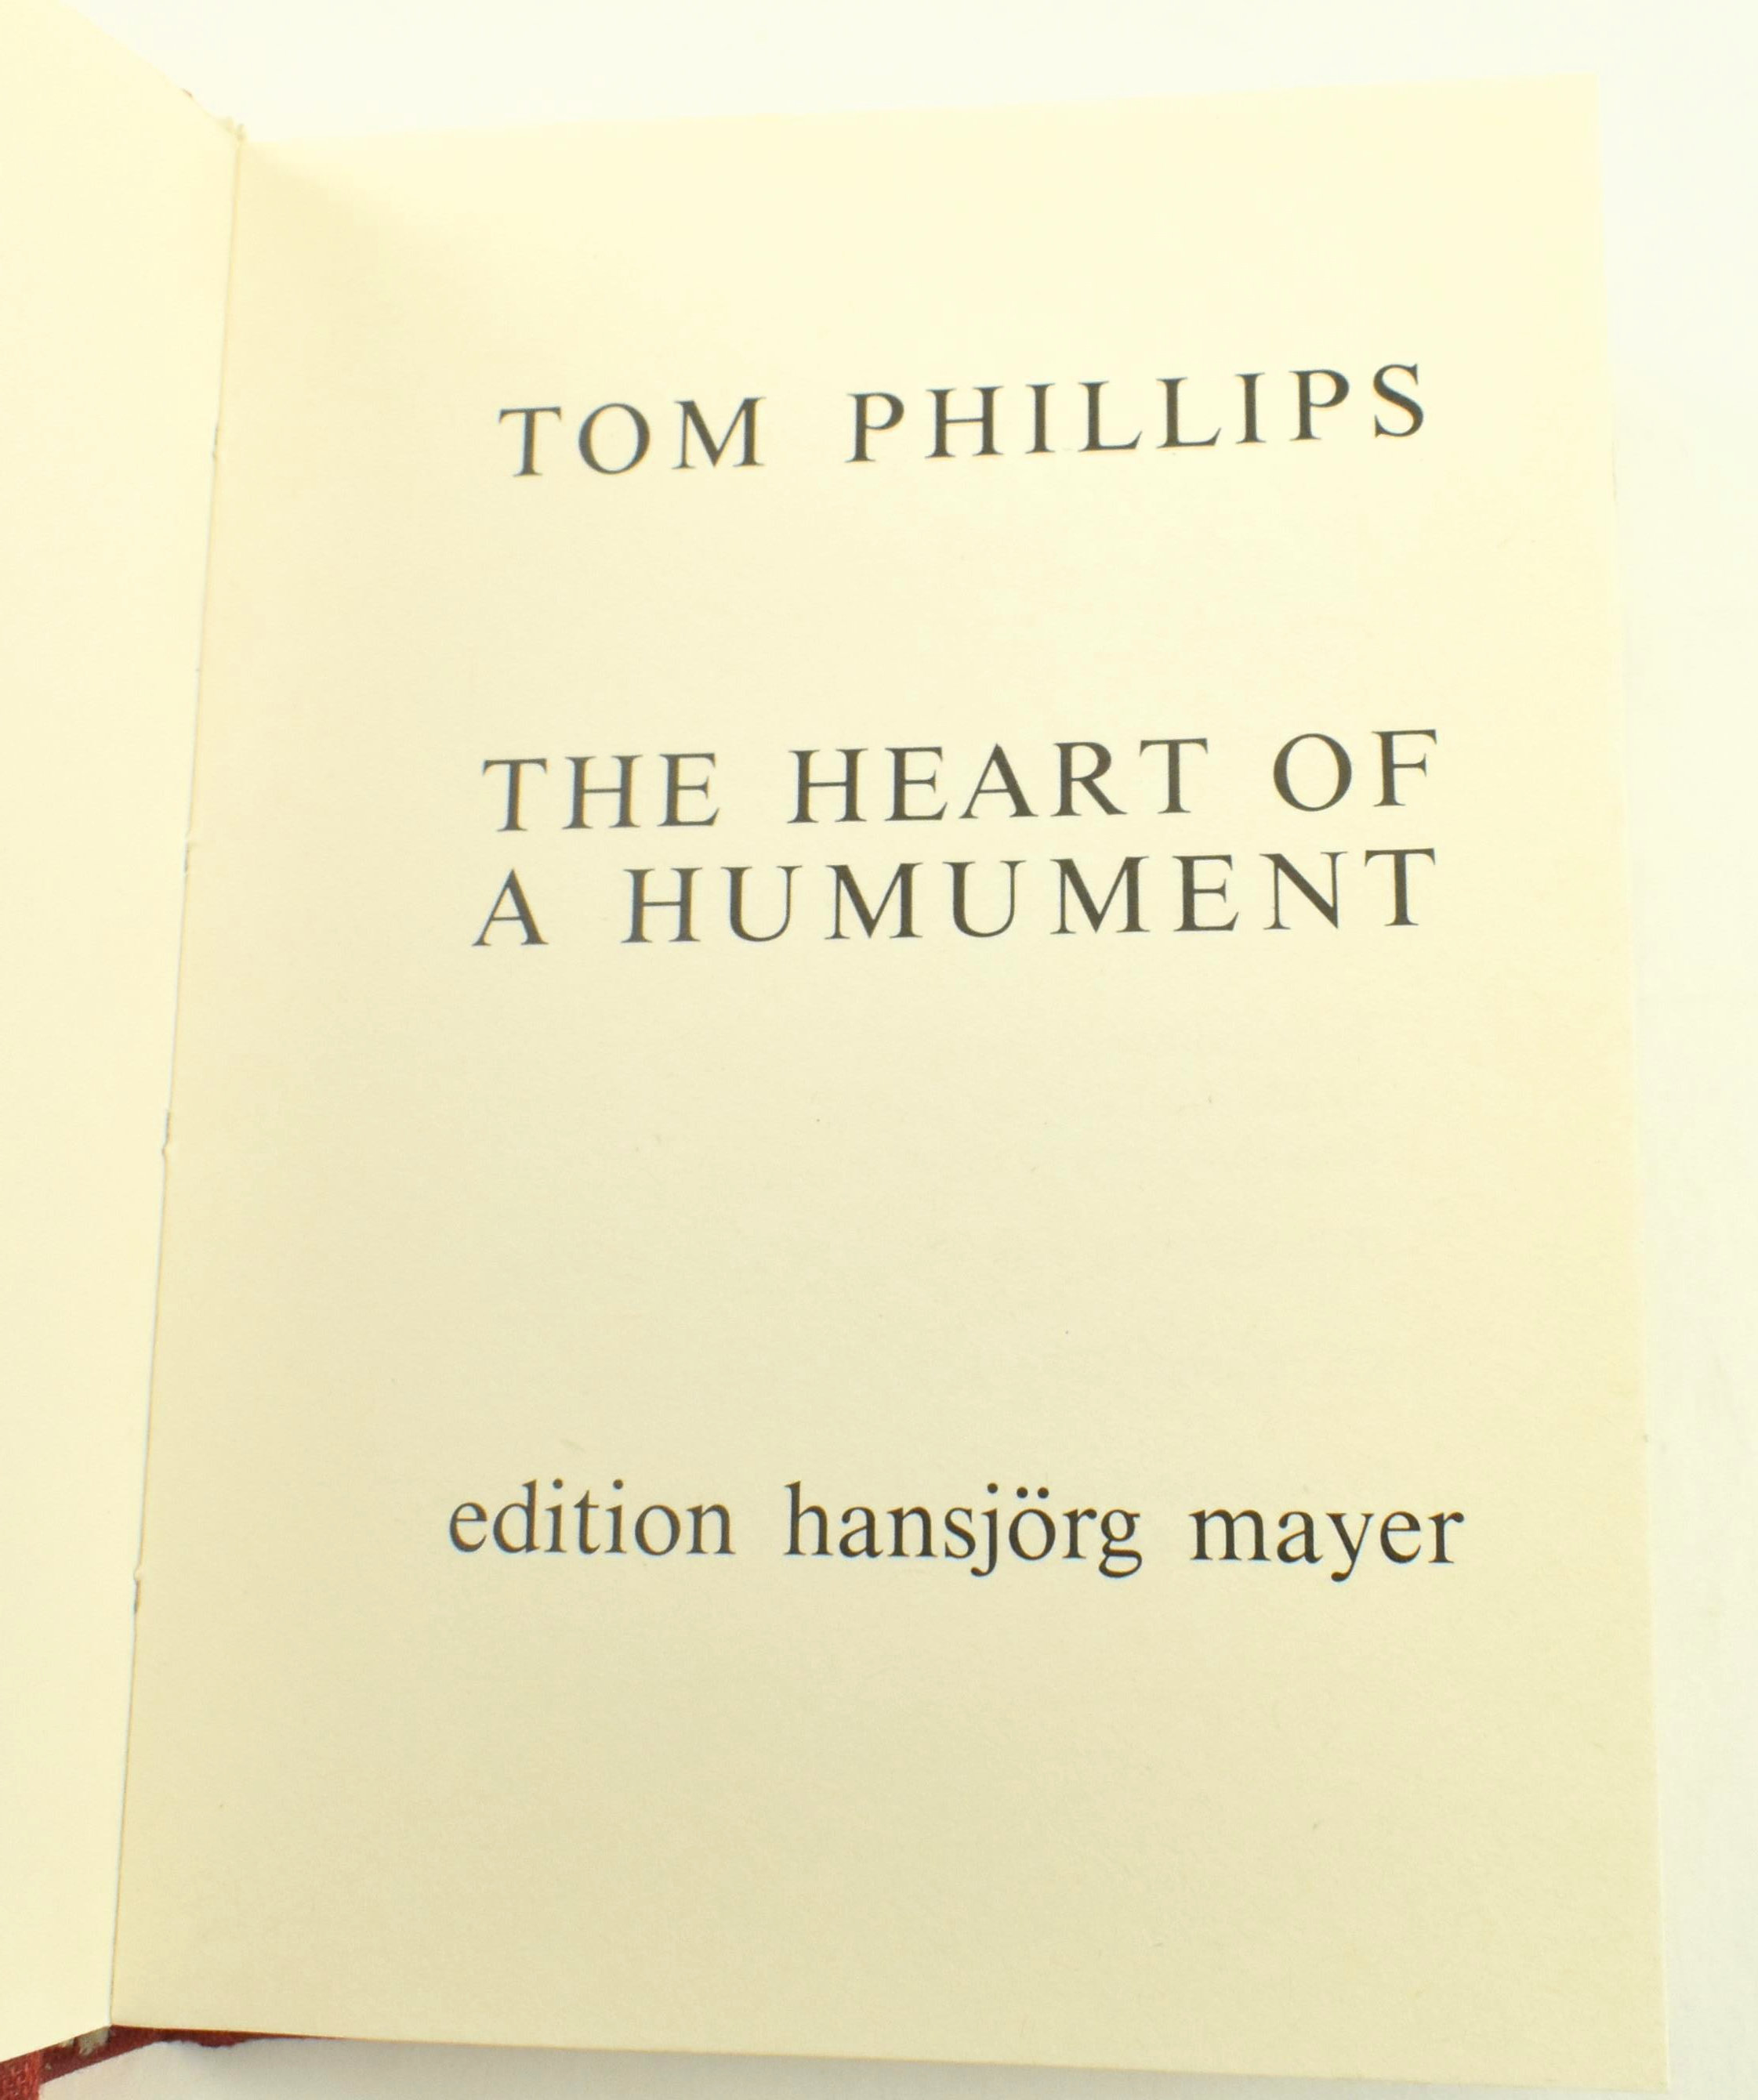 TOM PHILLIPS. TWO ILLUSTRATED WORKS, INCL. ONE SIGNED - Image 4 of 11